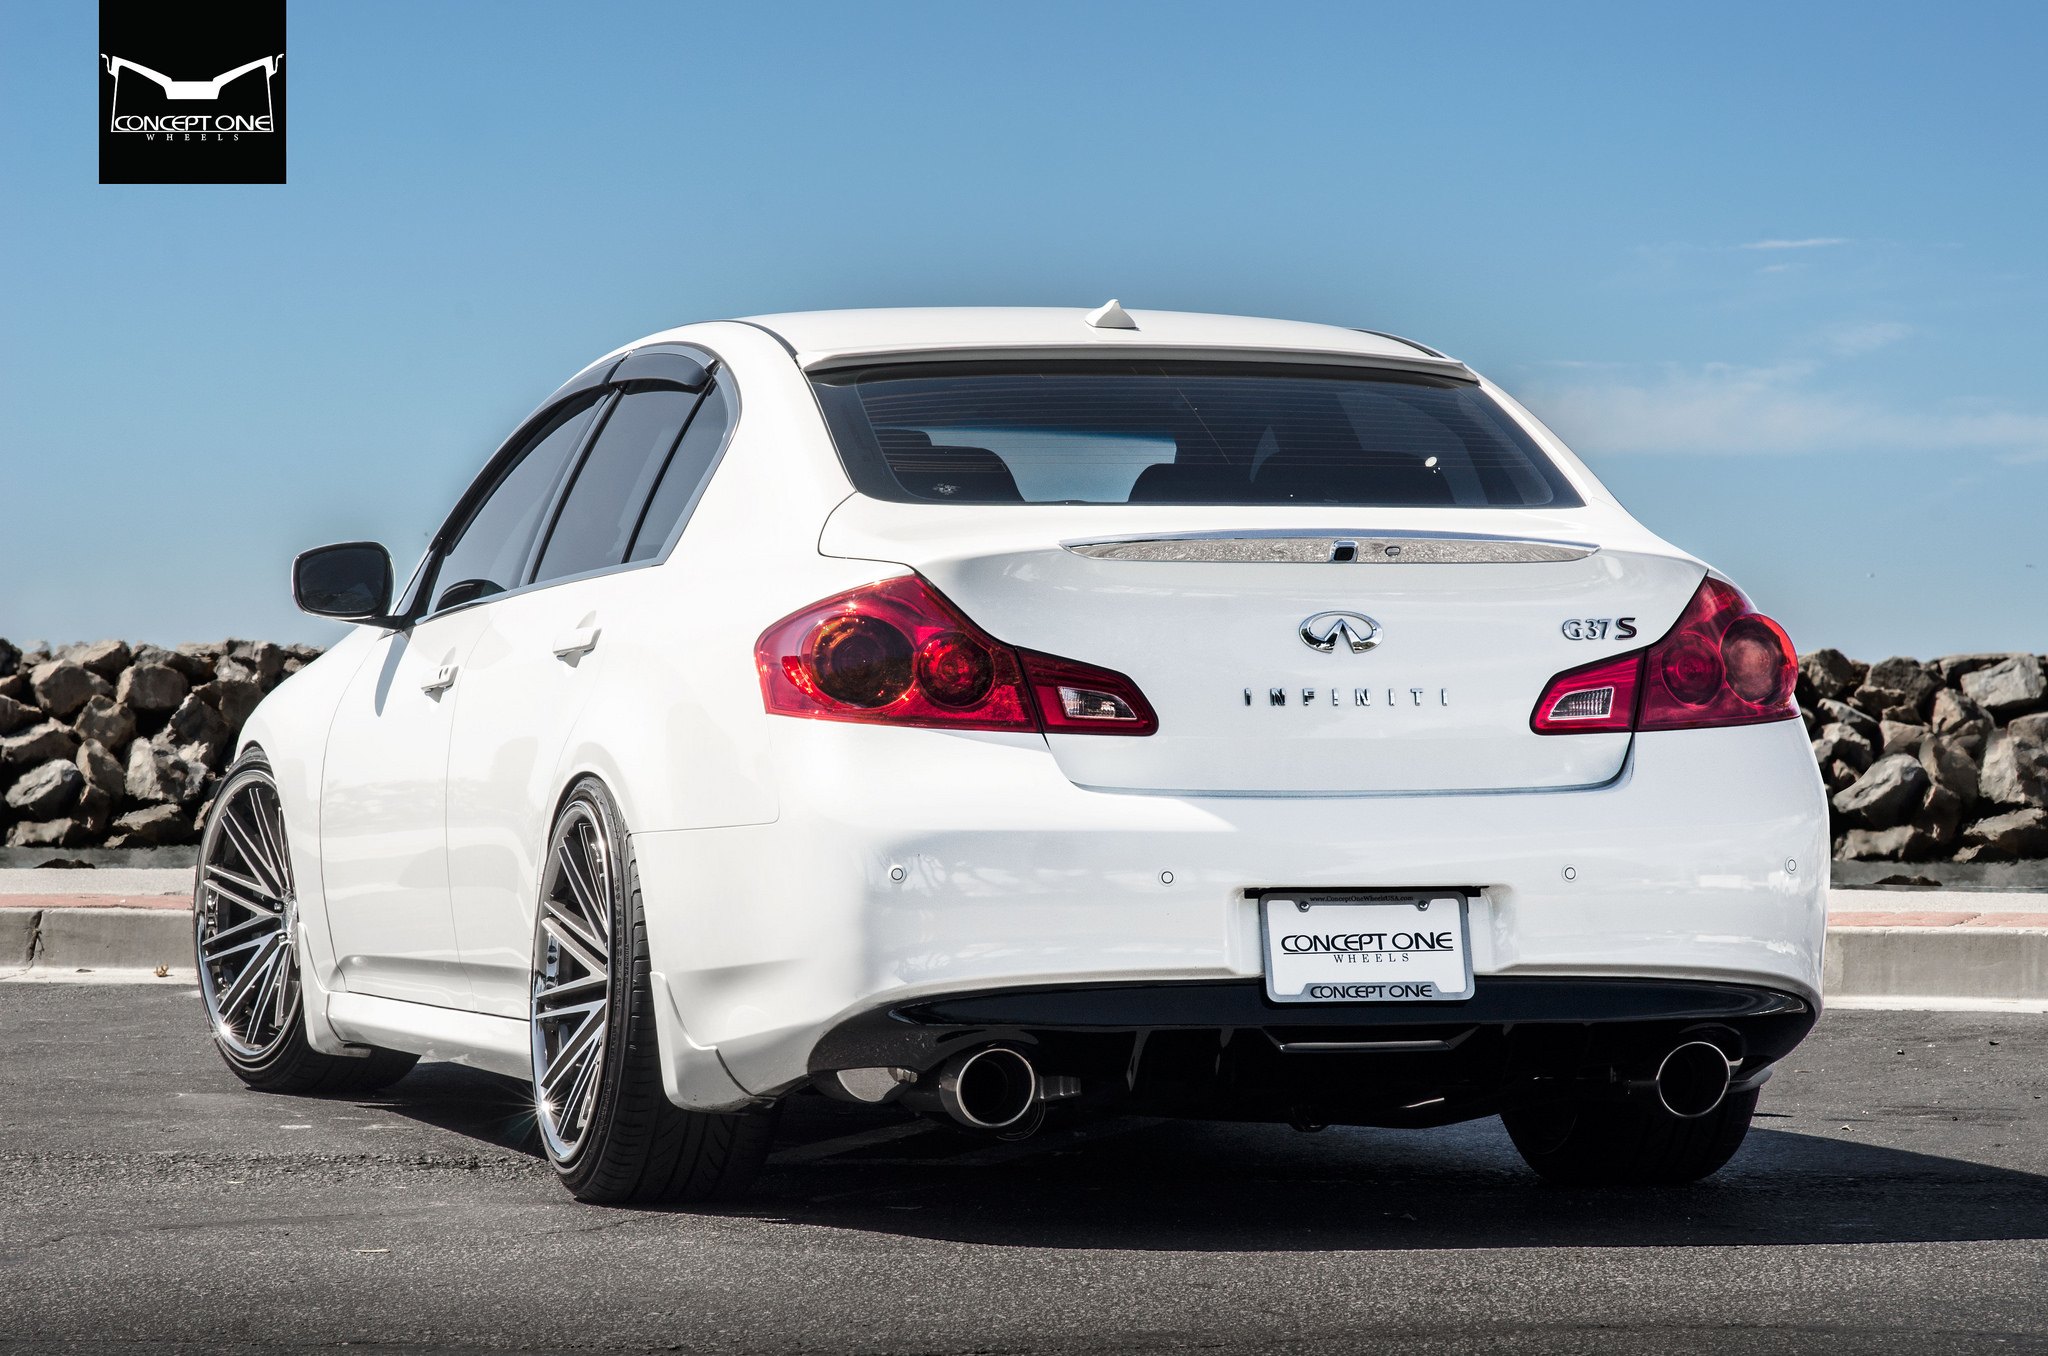 Custom Rear Diffuser on White Infiniti G37 - Photo by Concept One